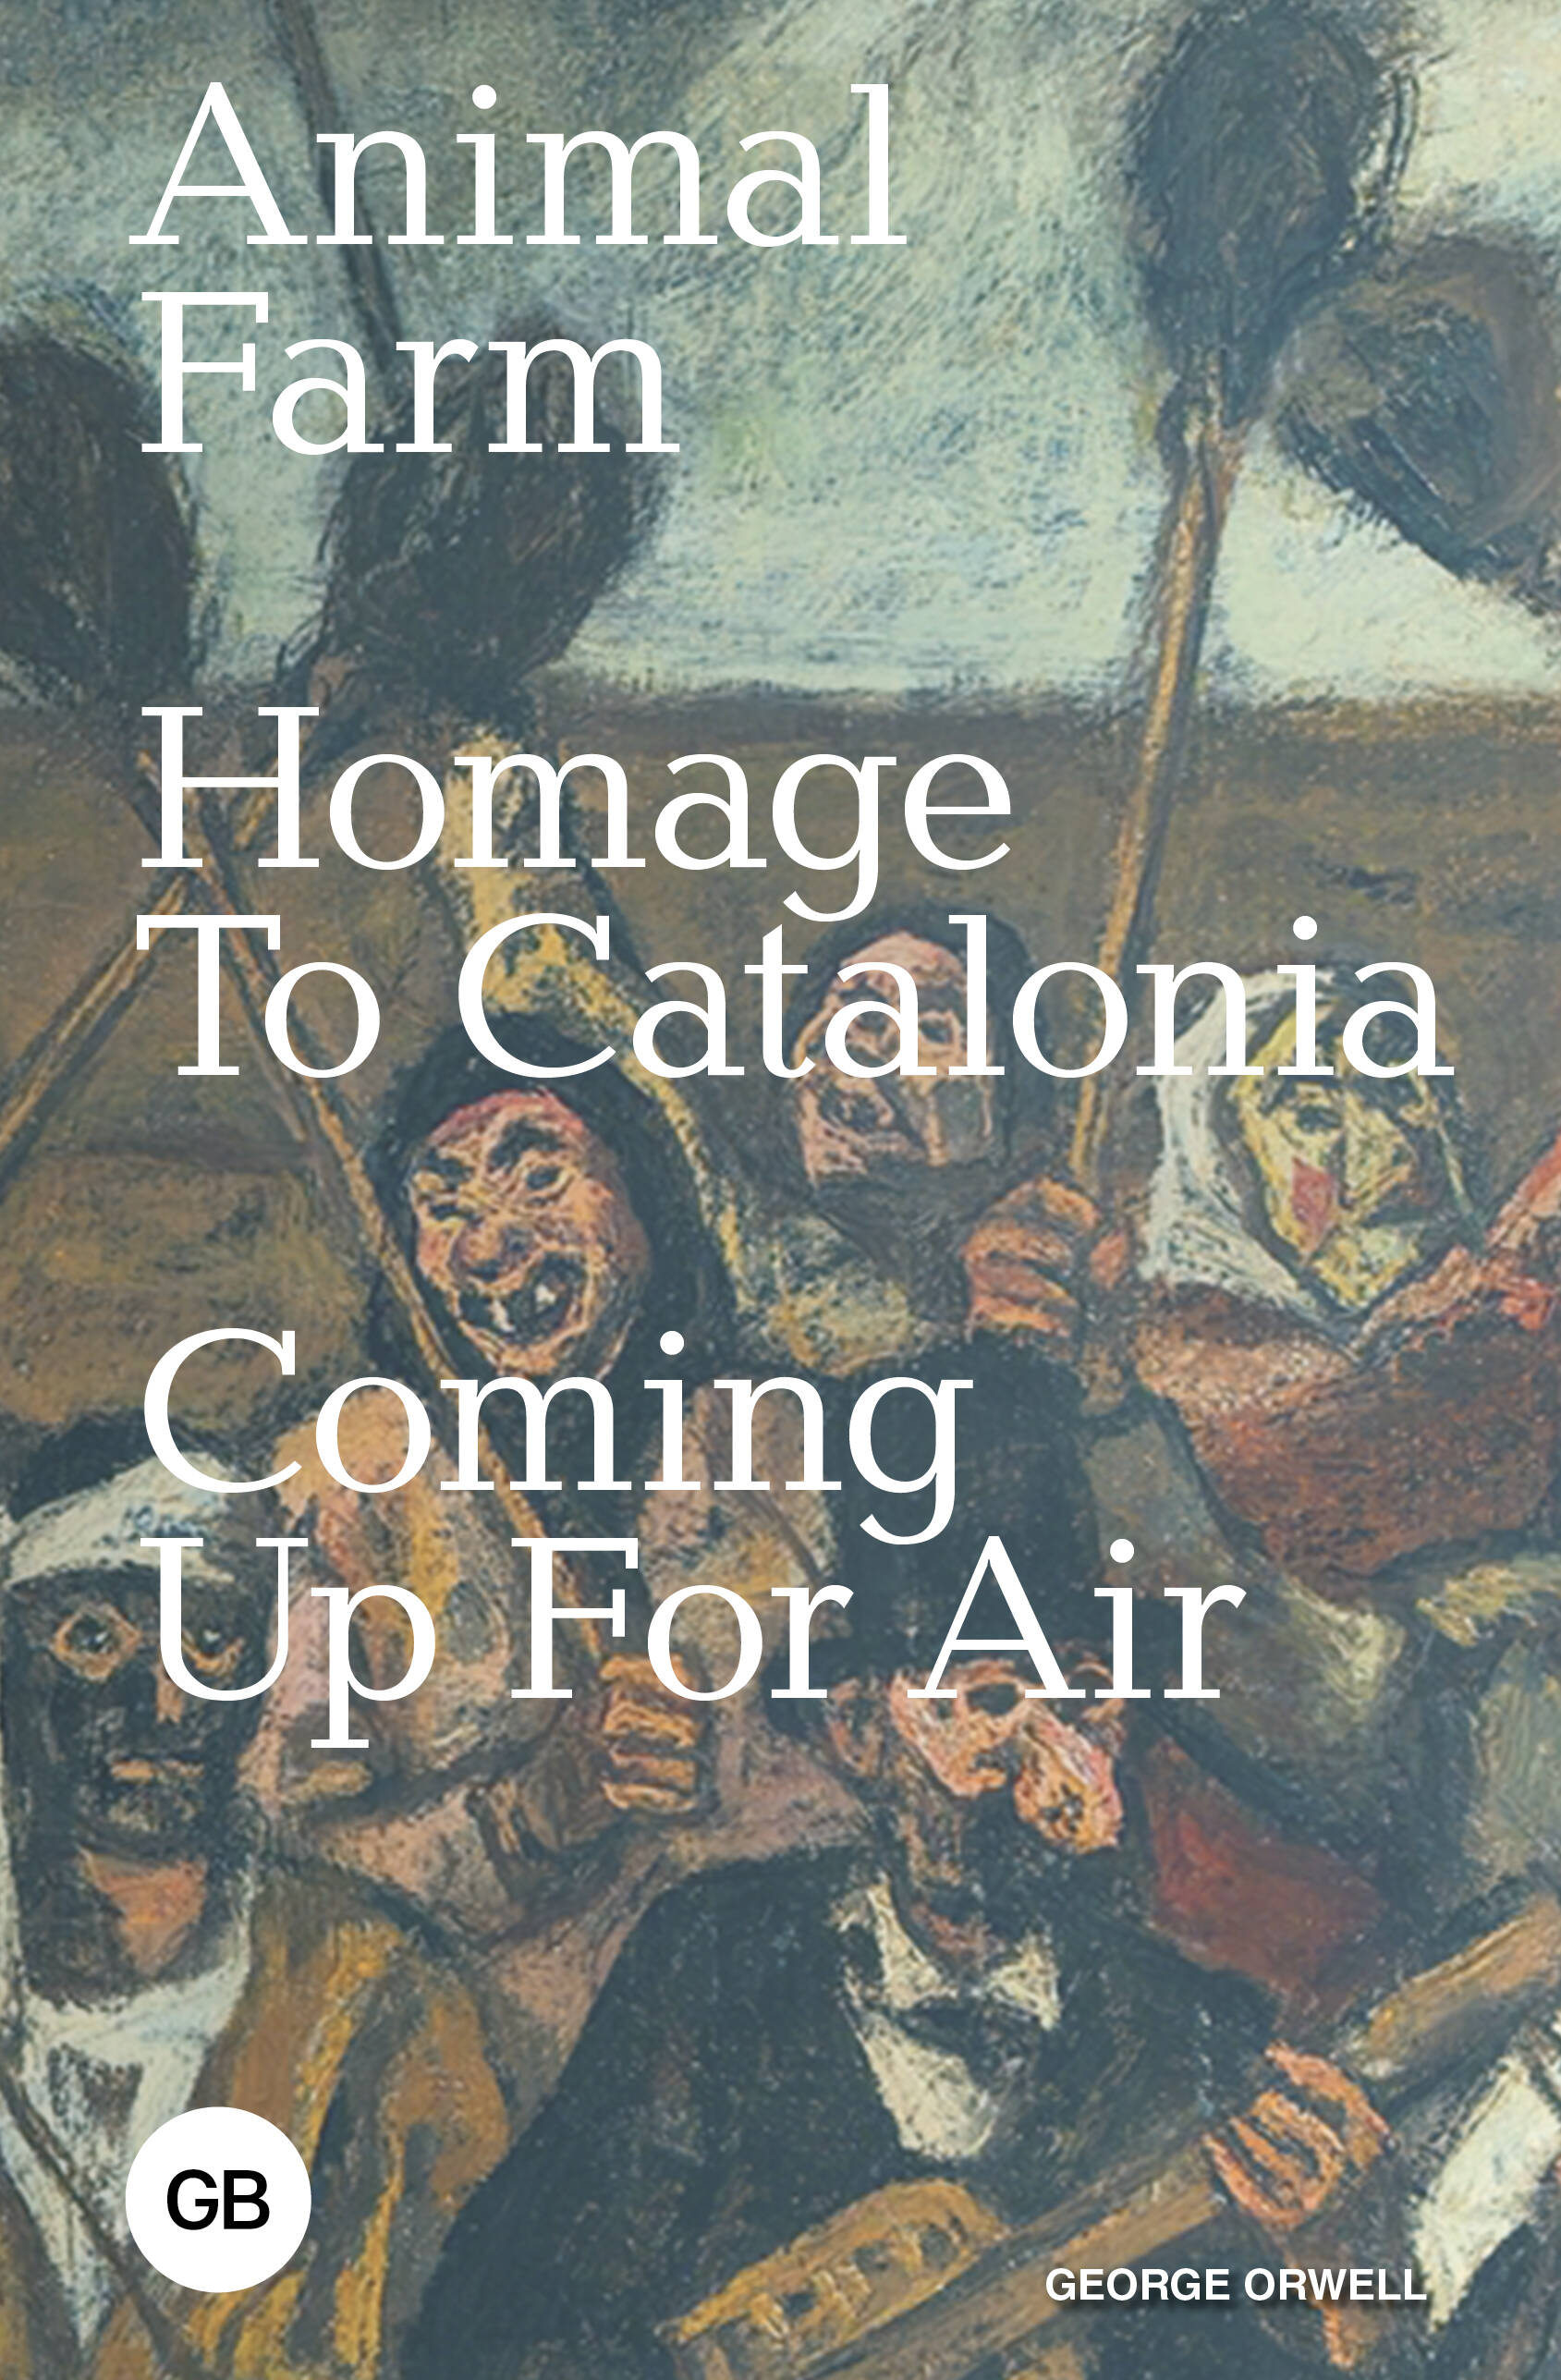 оруэлл джордж homage to catalonia Оруэлл Джордж Animal Farm, Homage to Catalonia, Coming Up for Air